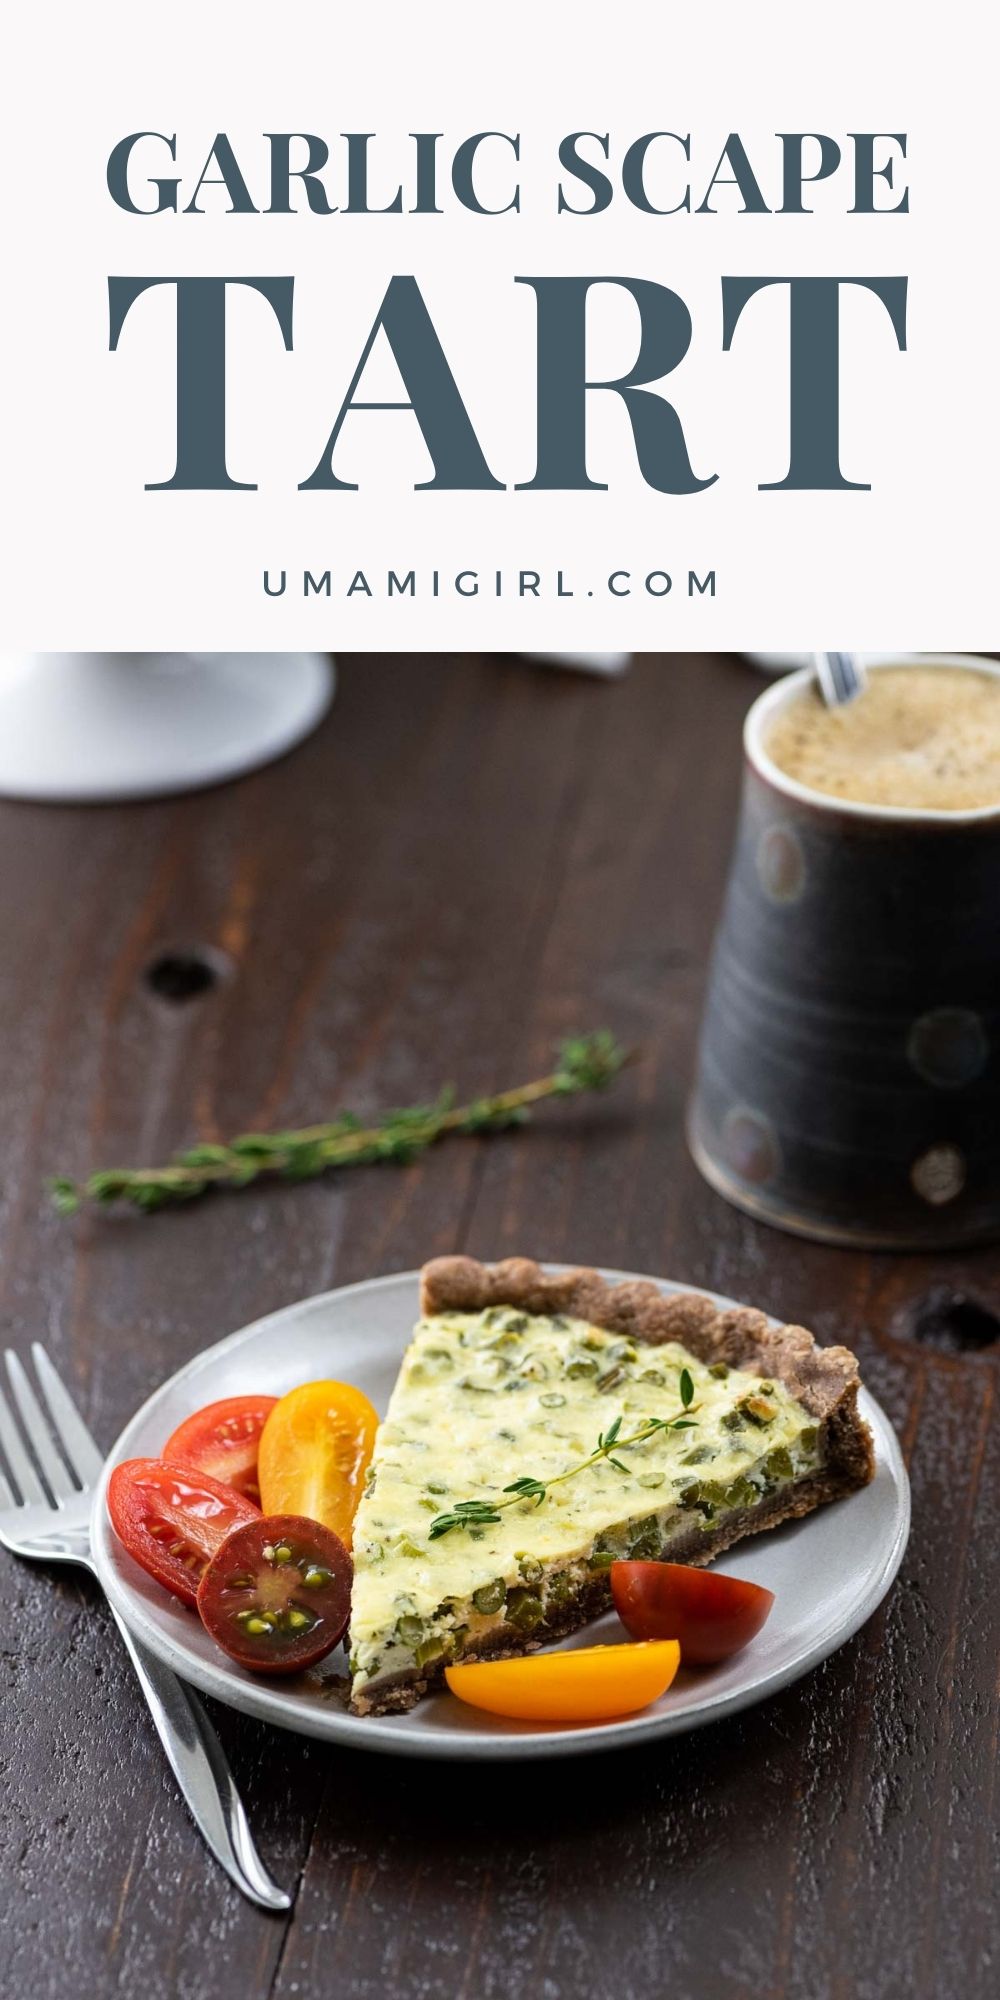 garlic scape tart with teff crust on a plate with tomatoes and a coffee cup